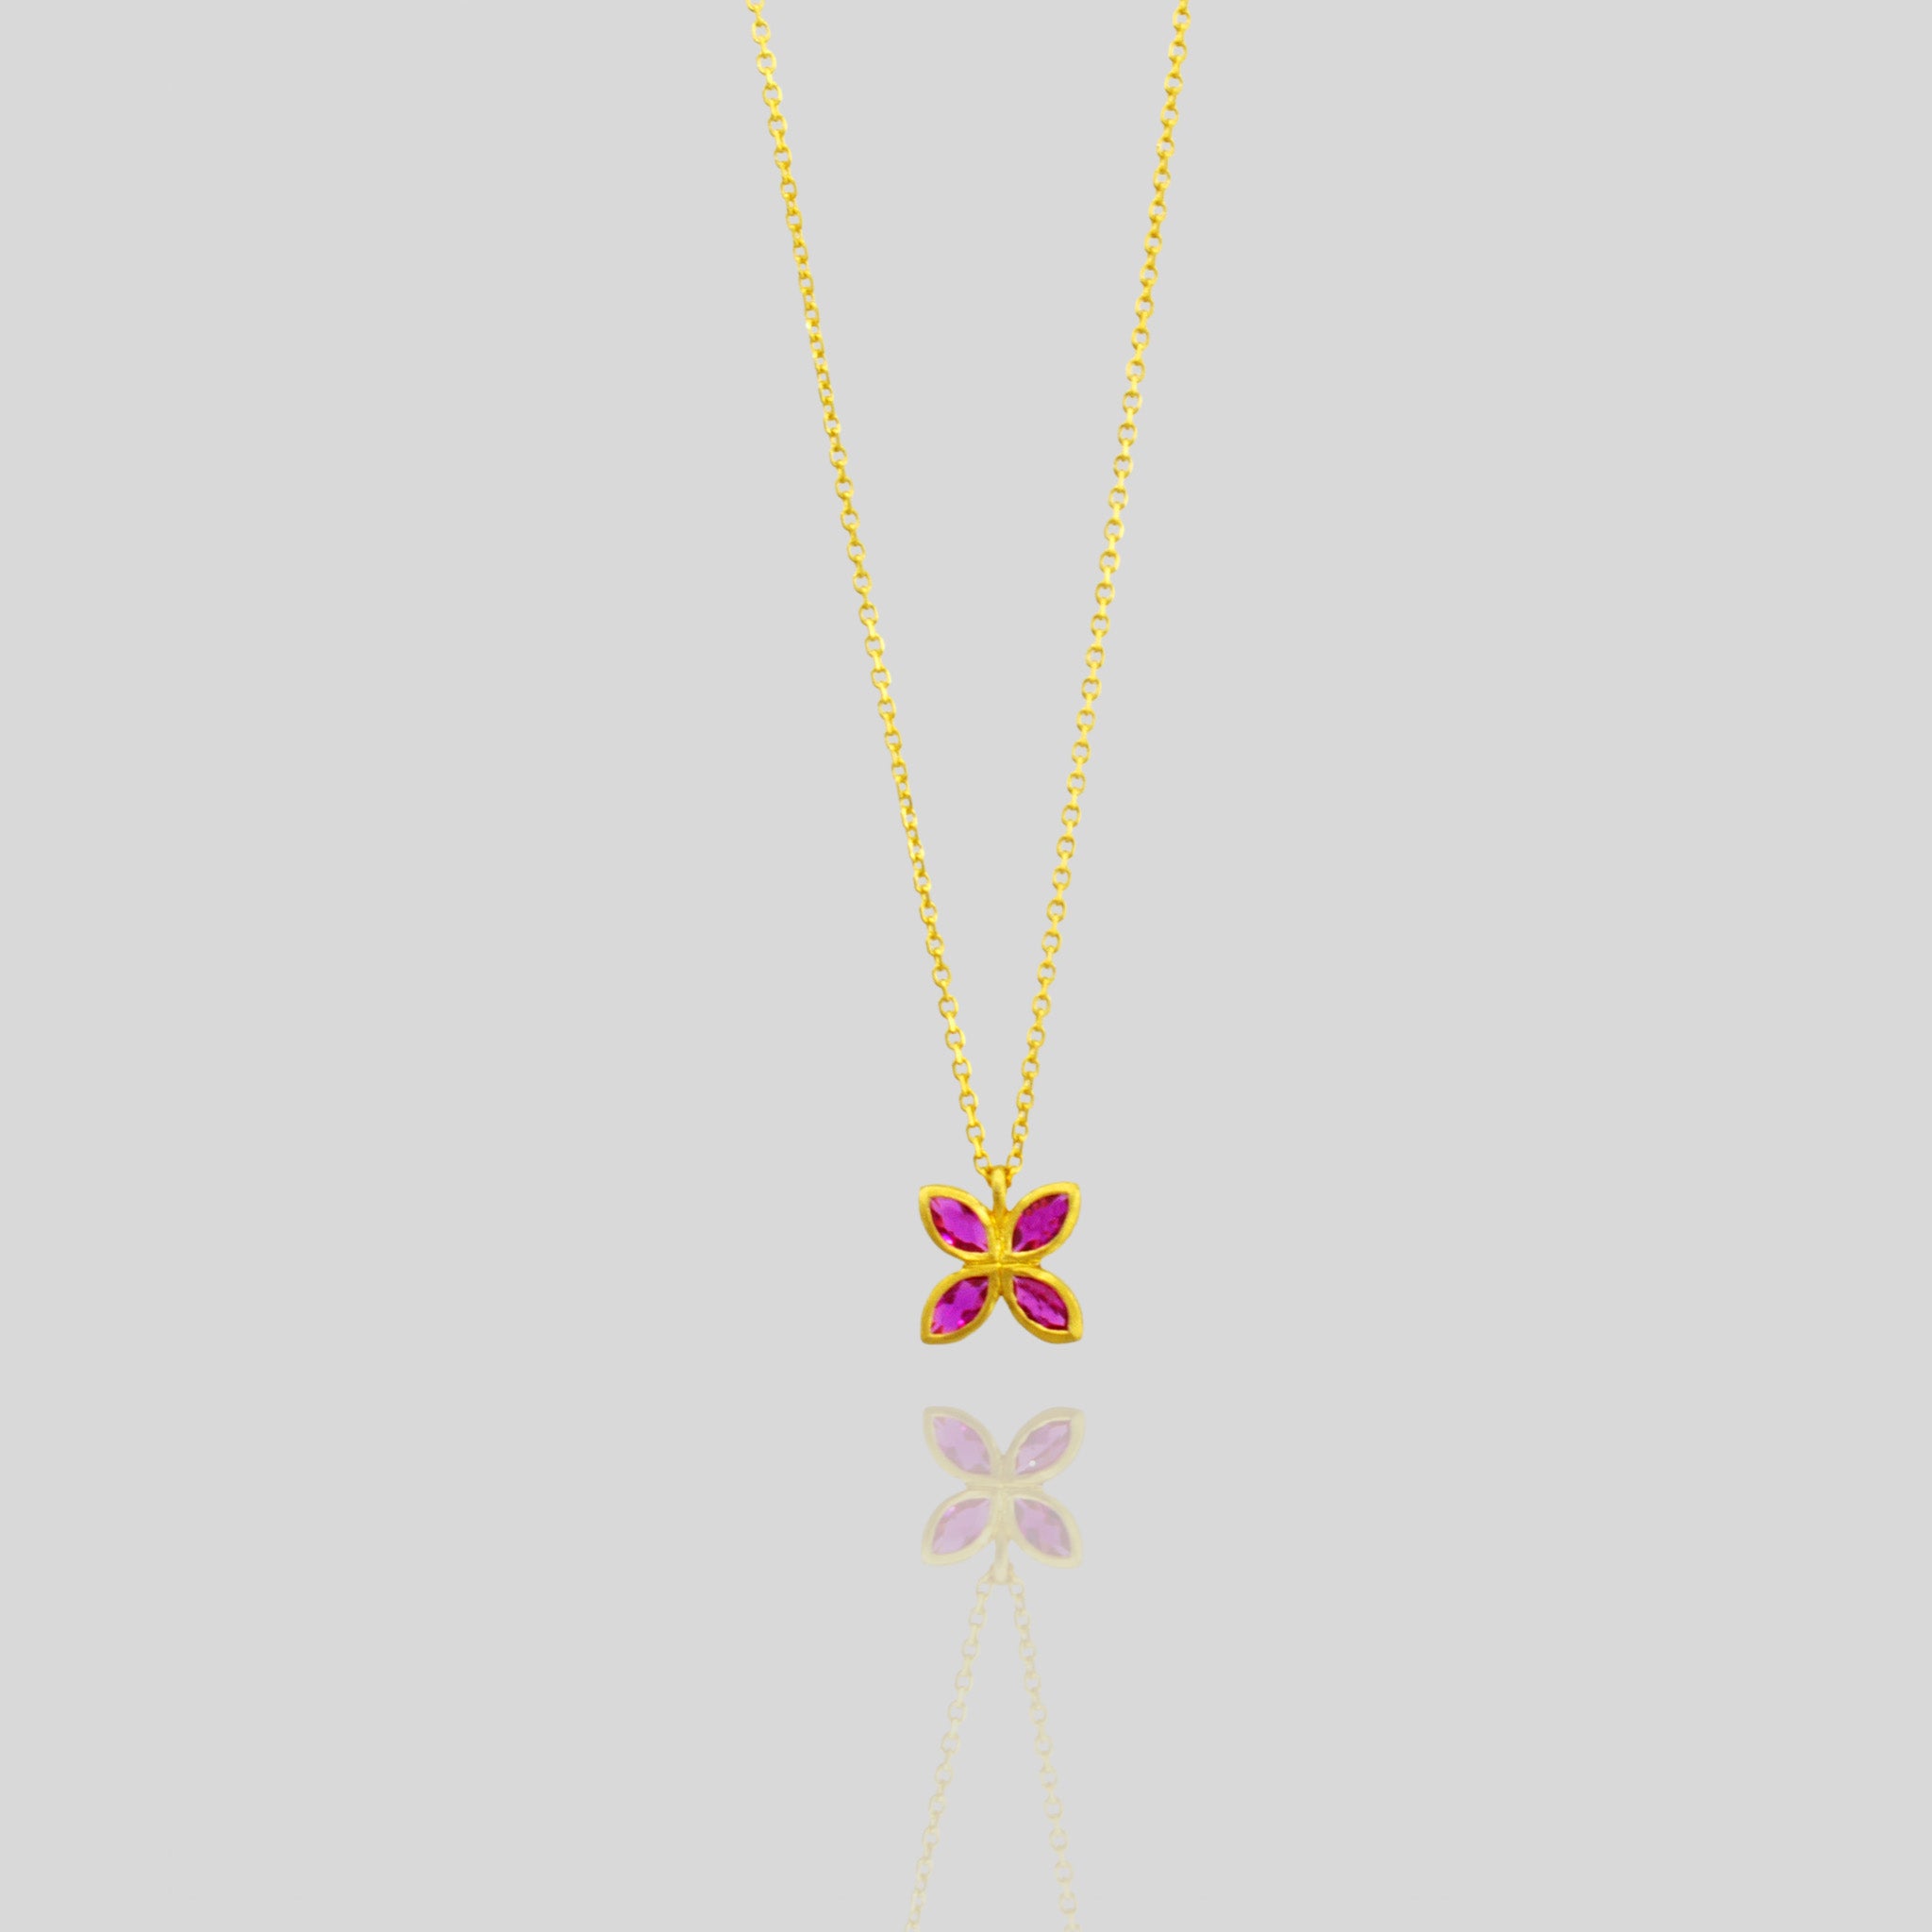 Elegant gold pendant with four marquise-cut Rubies arranged into a delicate flower design, offering luxury and beauty suitable for any gift occasion.